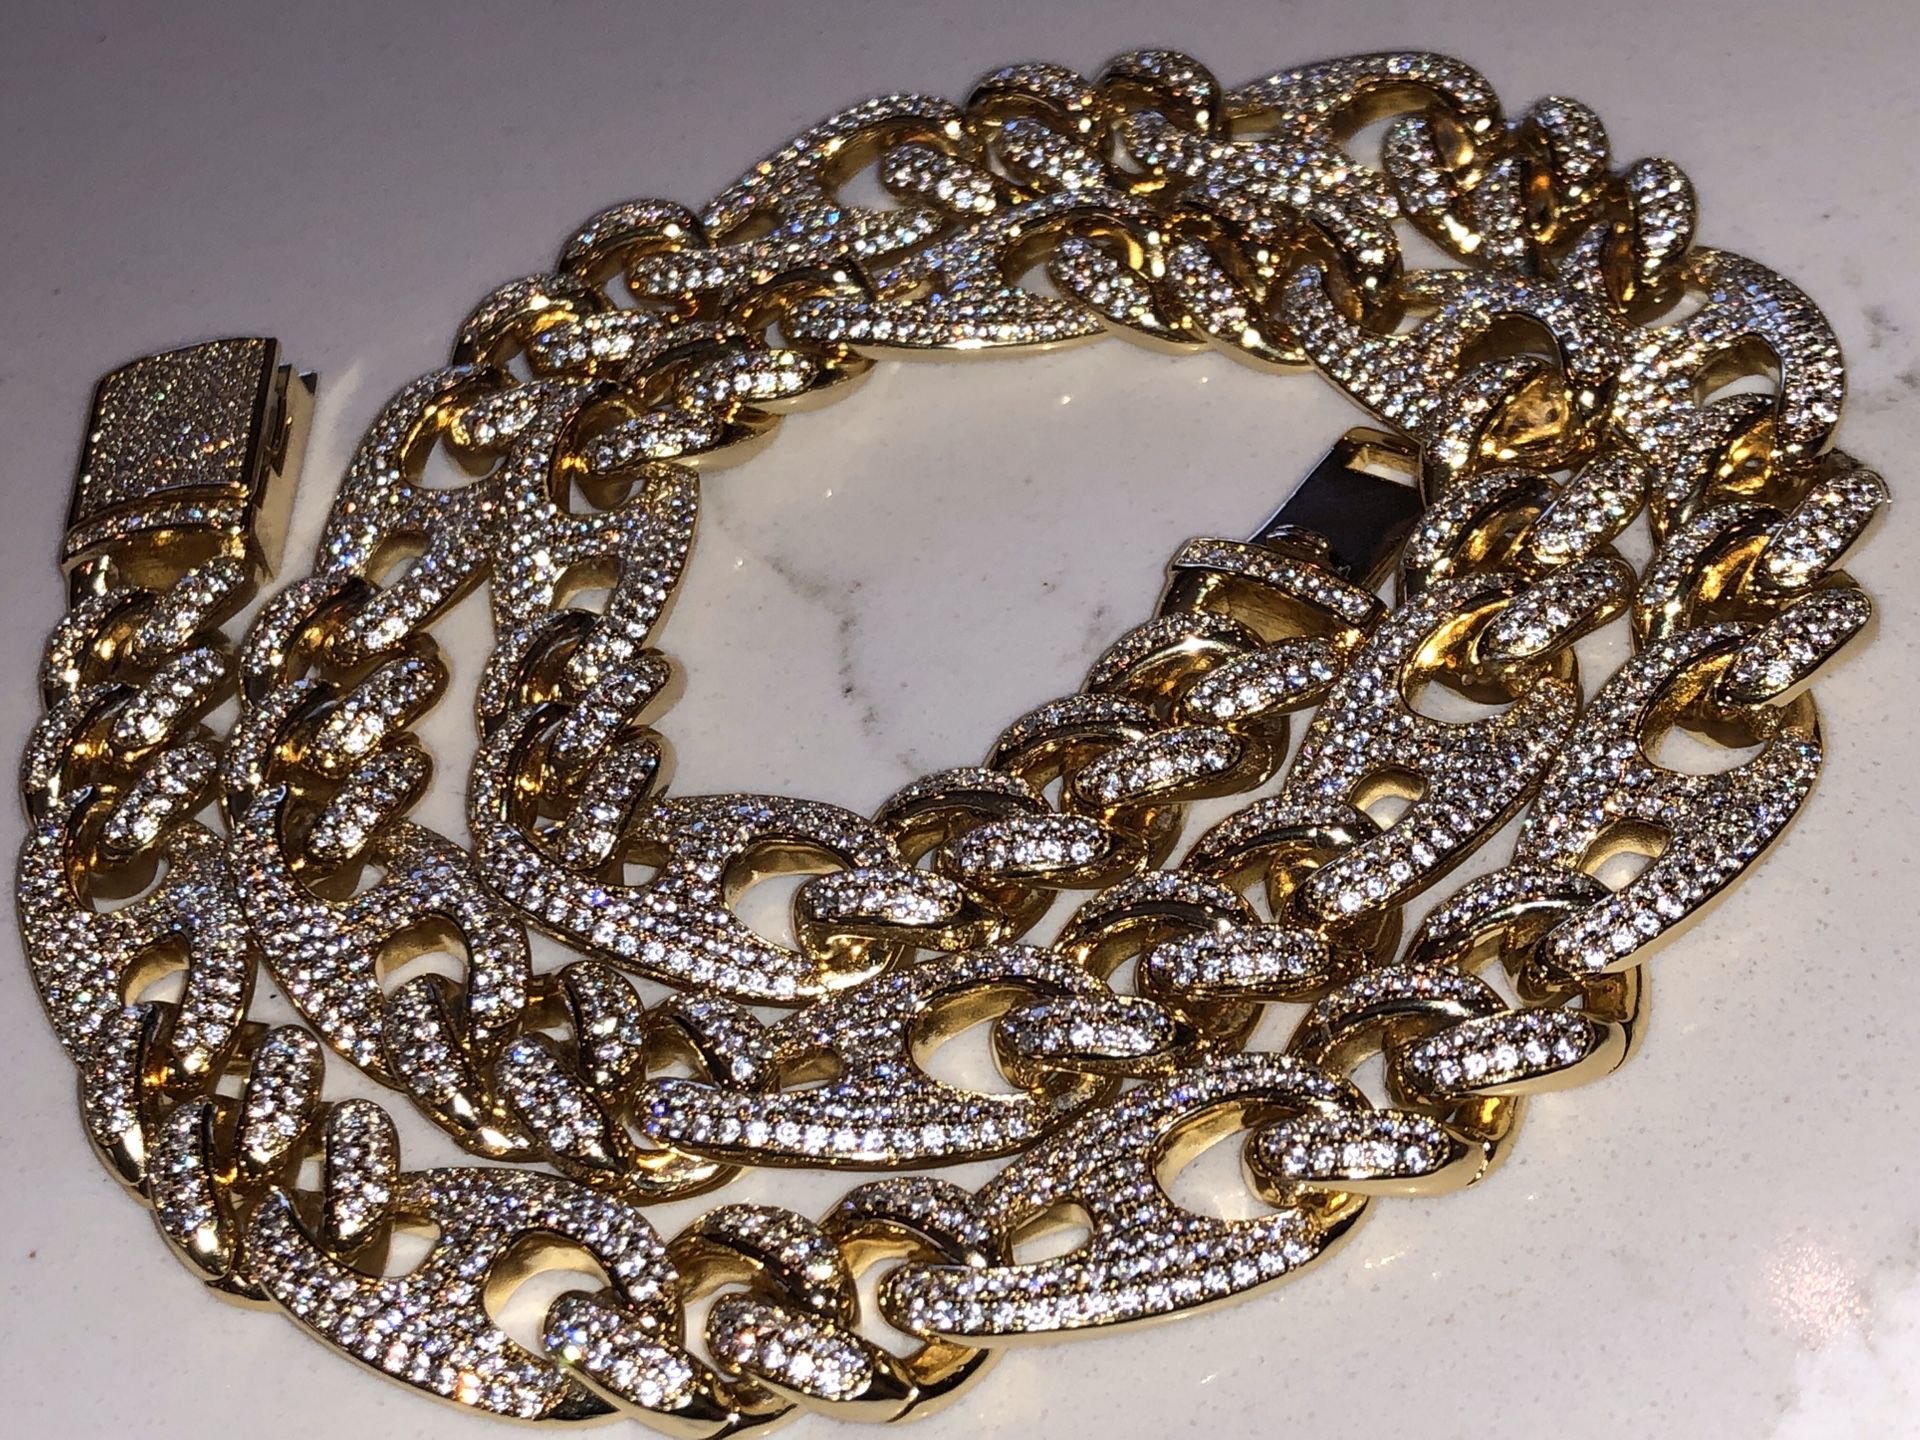 New jewelry iced out gold filled 12 mm mariner link chain necklace box lock created diamonds